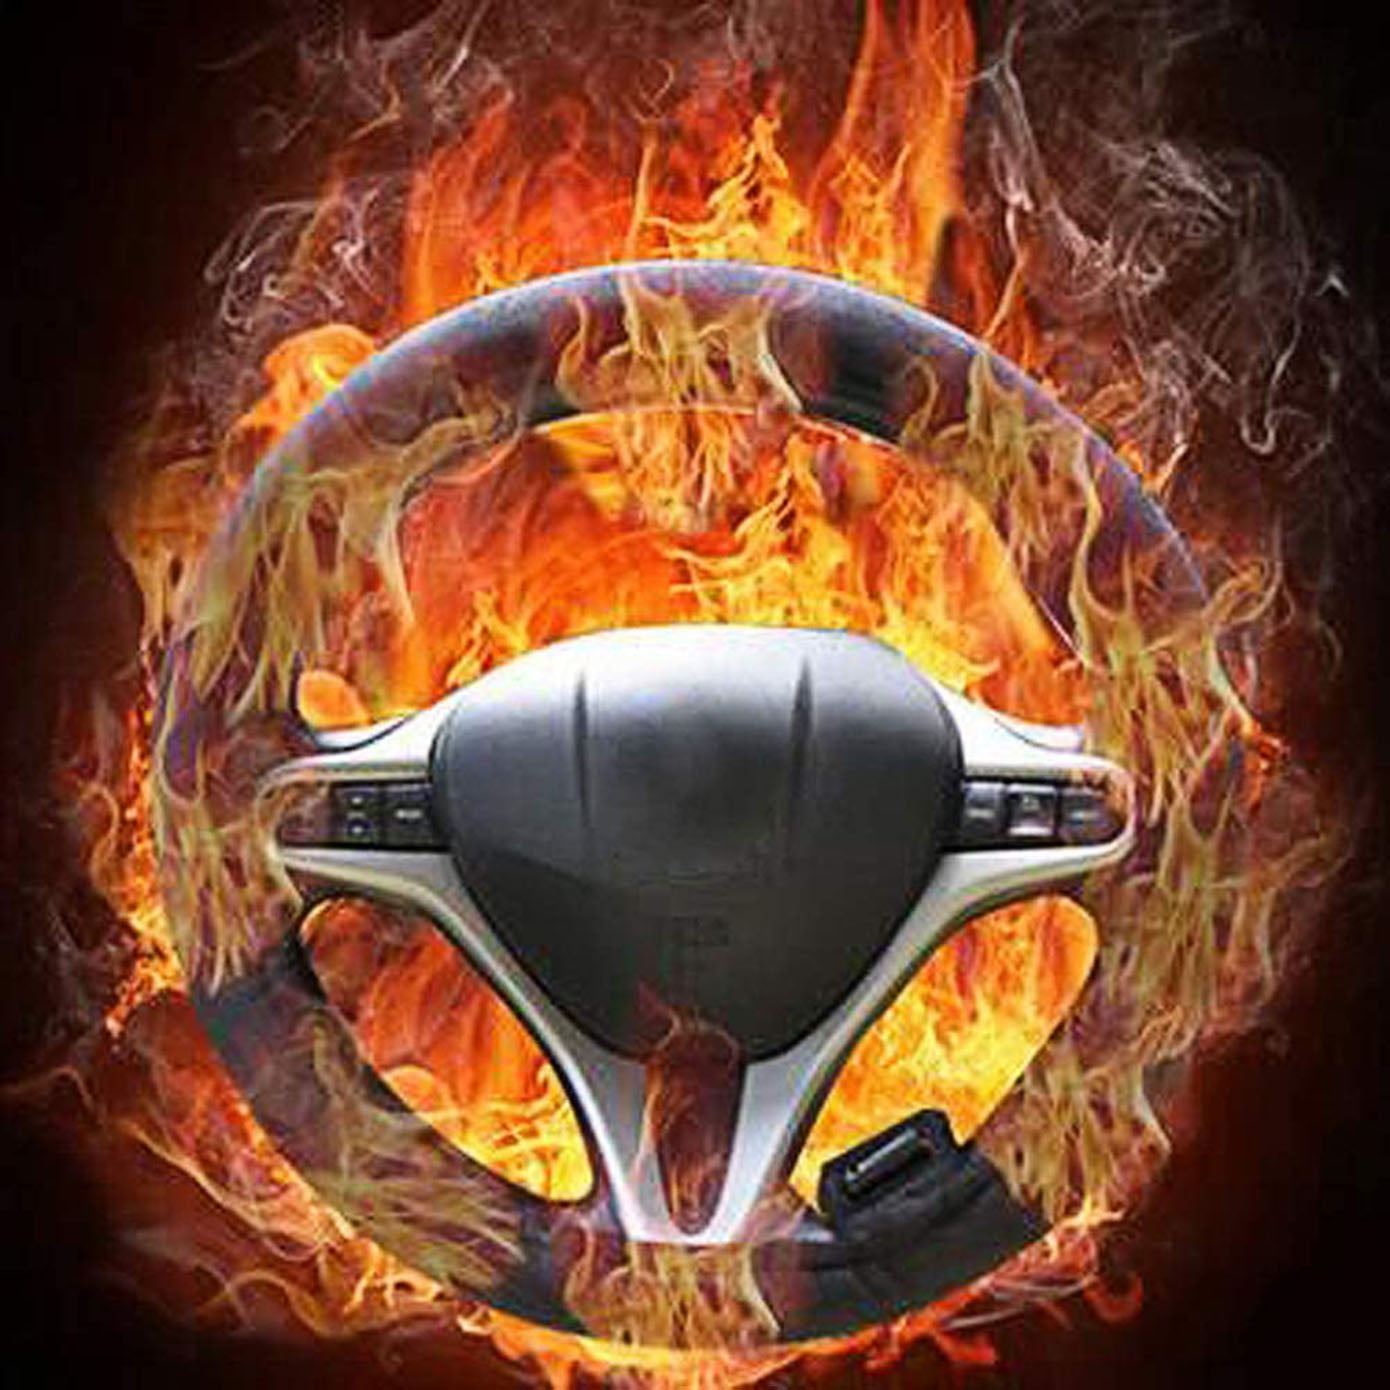 Heated Steering Wheel Cover 12V Auto Steering Wheel Black Protector Cover  Heater 